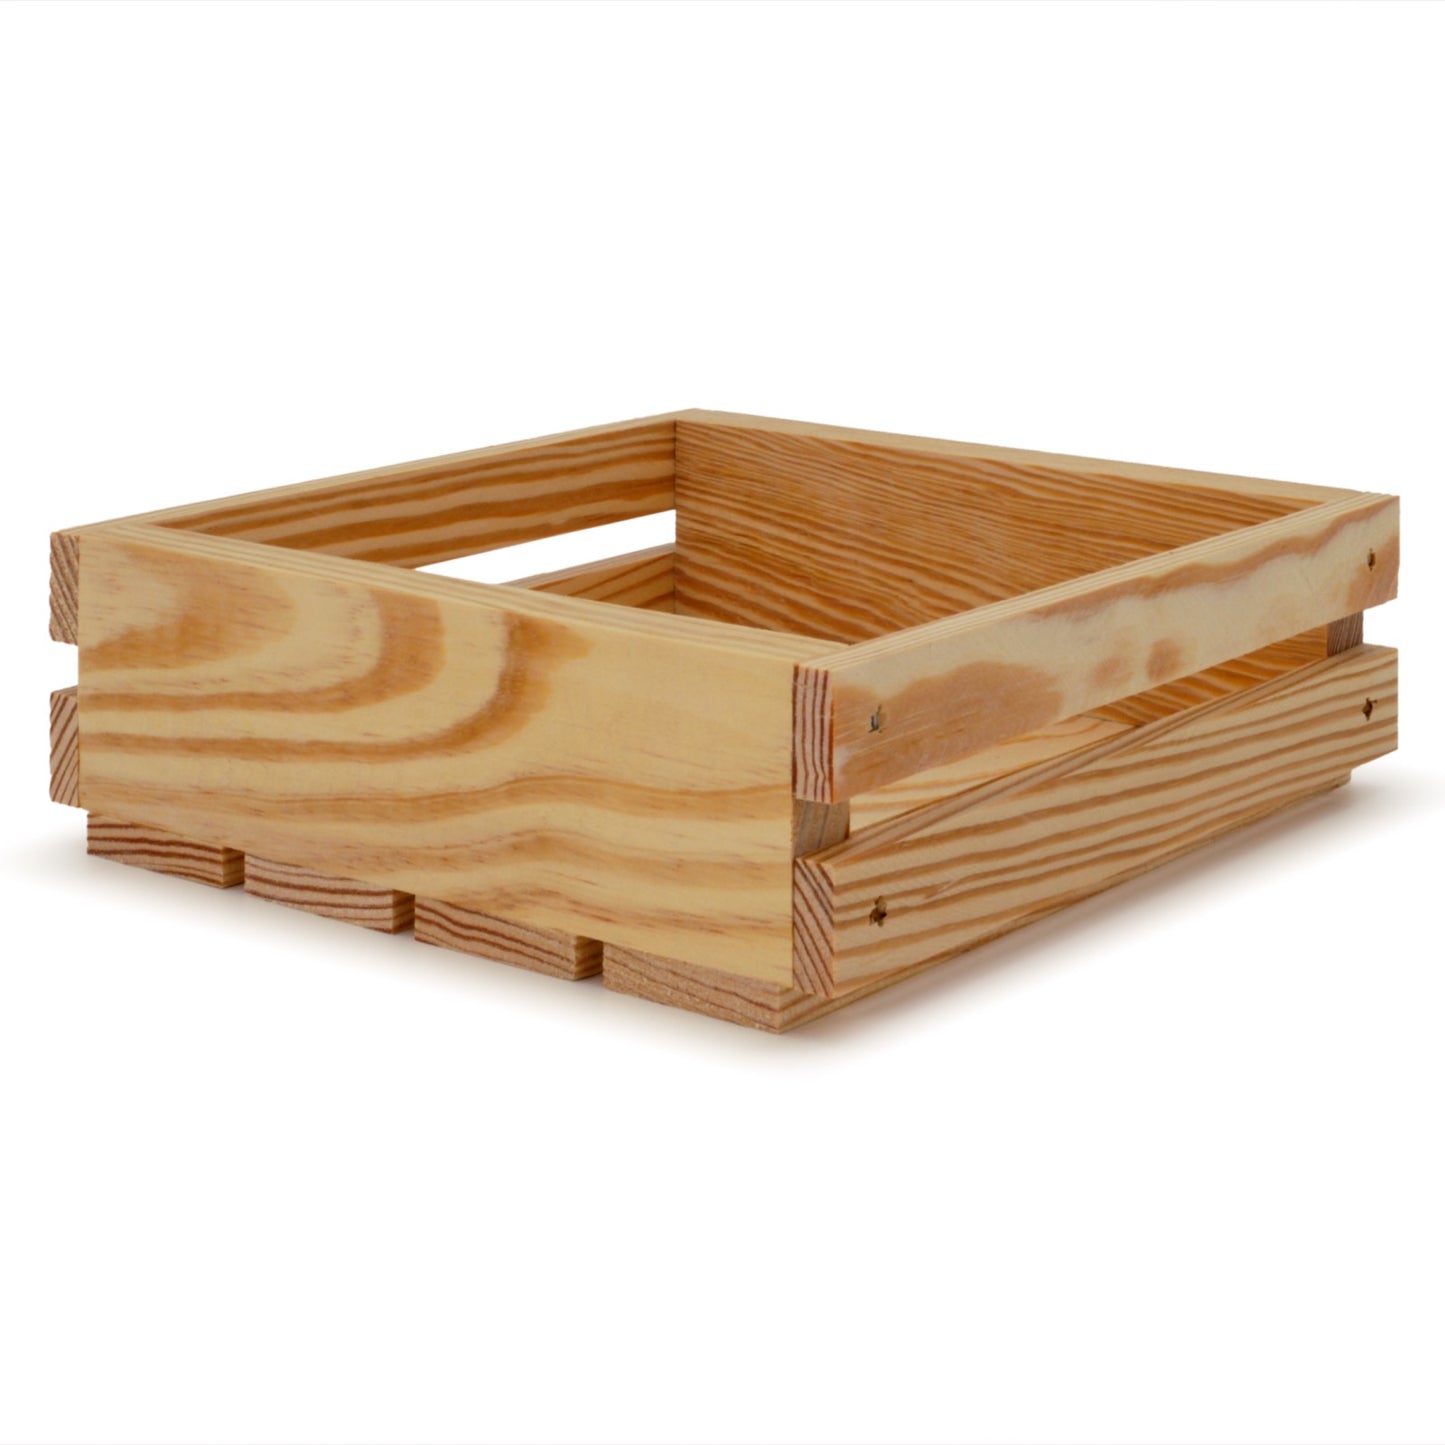 Small wooden crates 8x8x2.5, 6-SS-8-8-2.5-NX-NW-NL, 12-SS-8-8-2.5-NX-NW-NL, 24-SS-8-8-2.5-NX-NW-NL, 48-SS-8-8-2.5-NX-NW-NL, 96-SS-8-8-2.5-NX-NW-NL